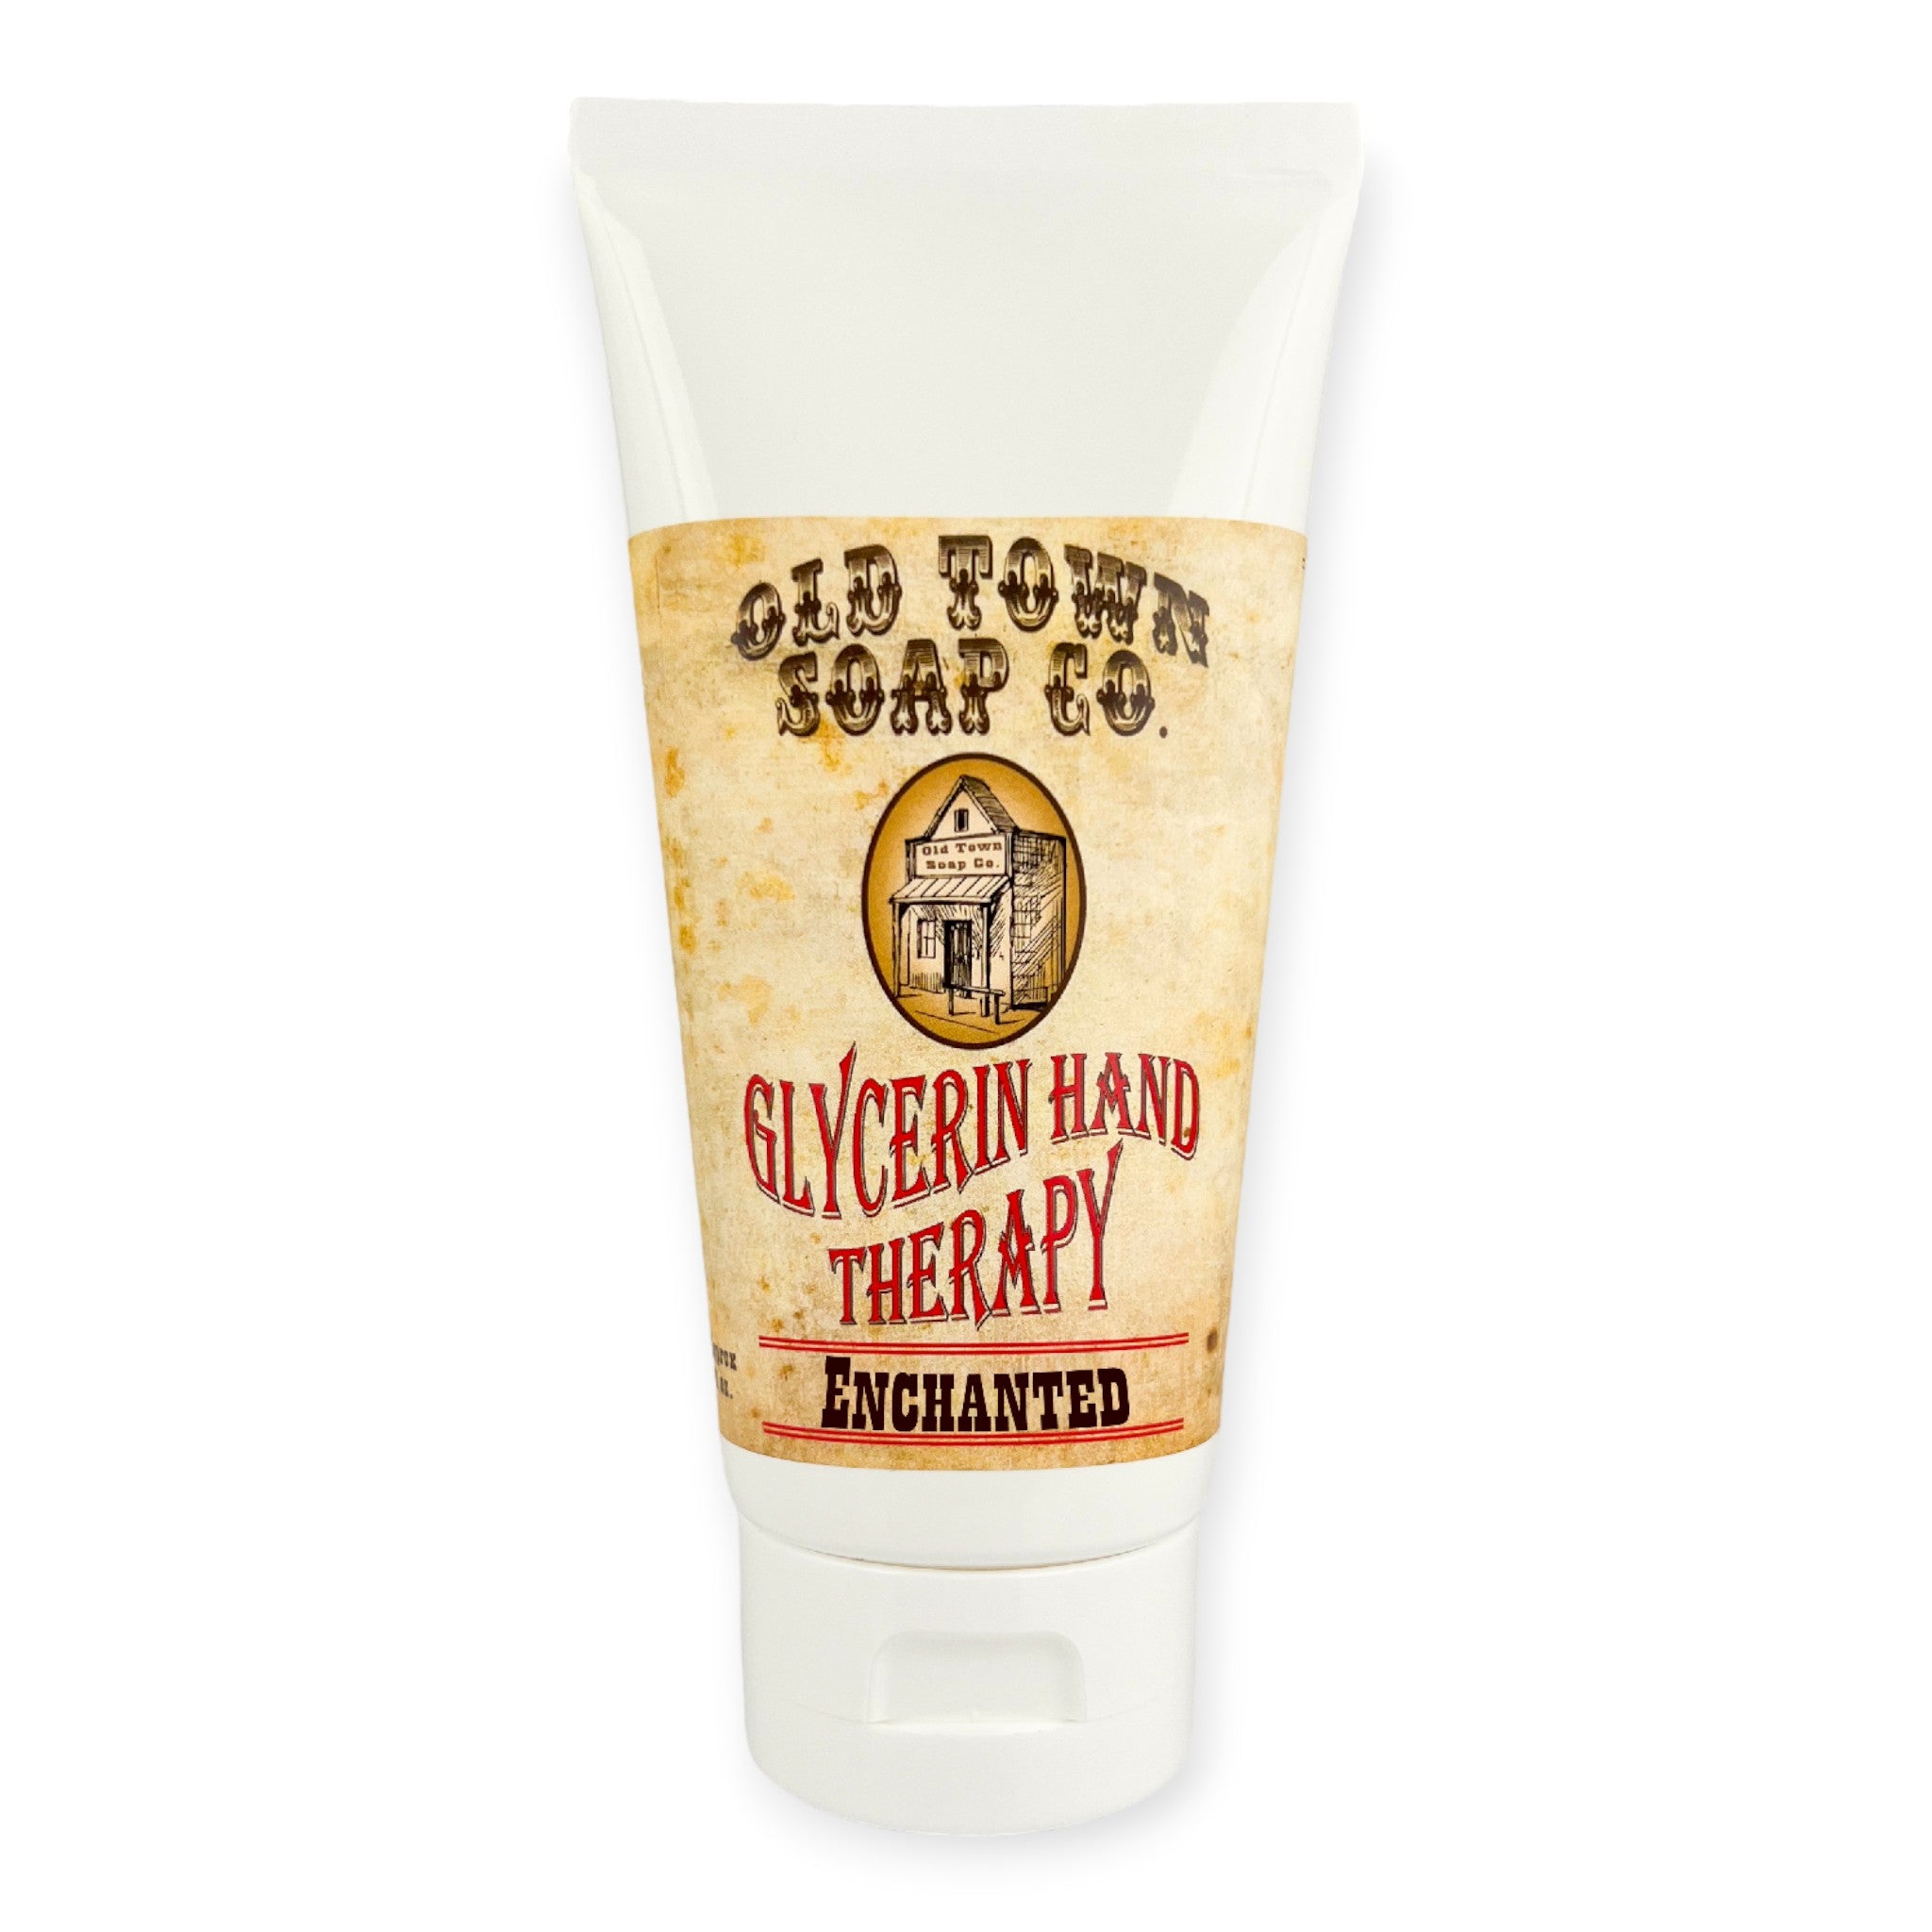 Enchanted 6oz Glycerin Hand Therapy